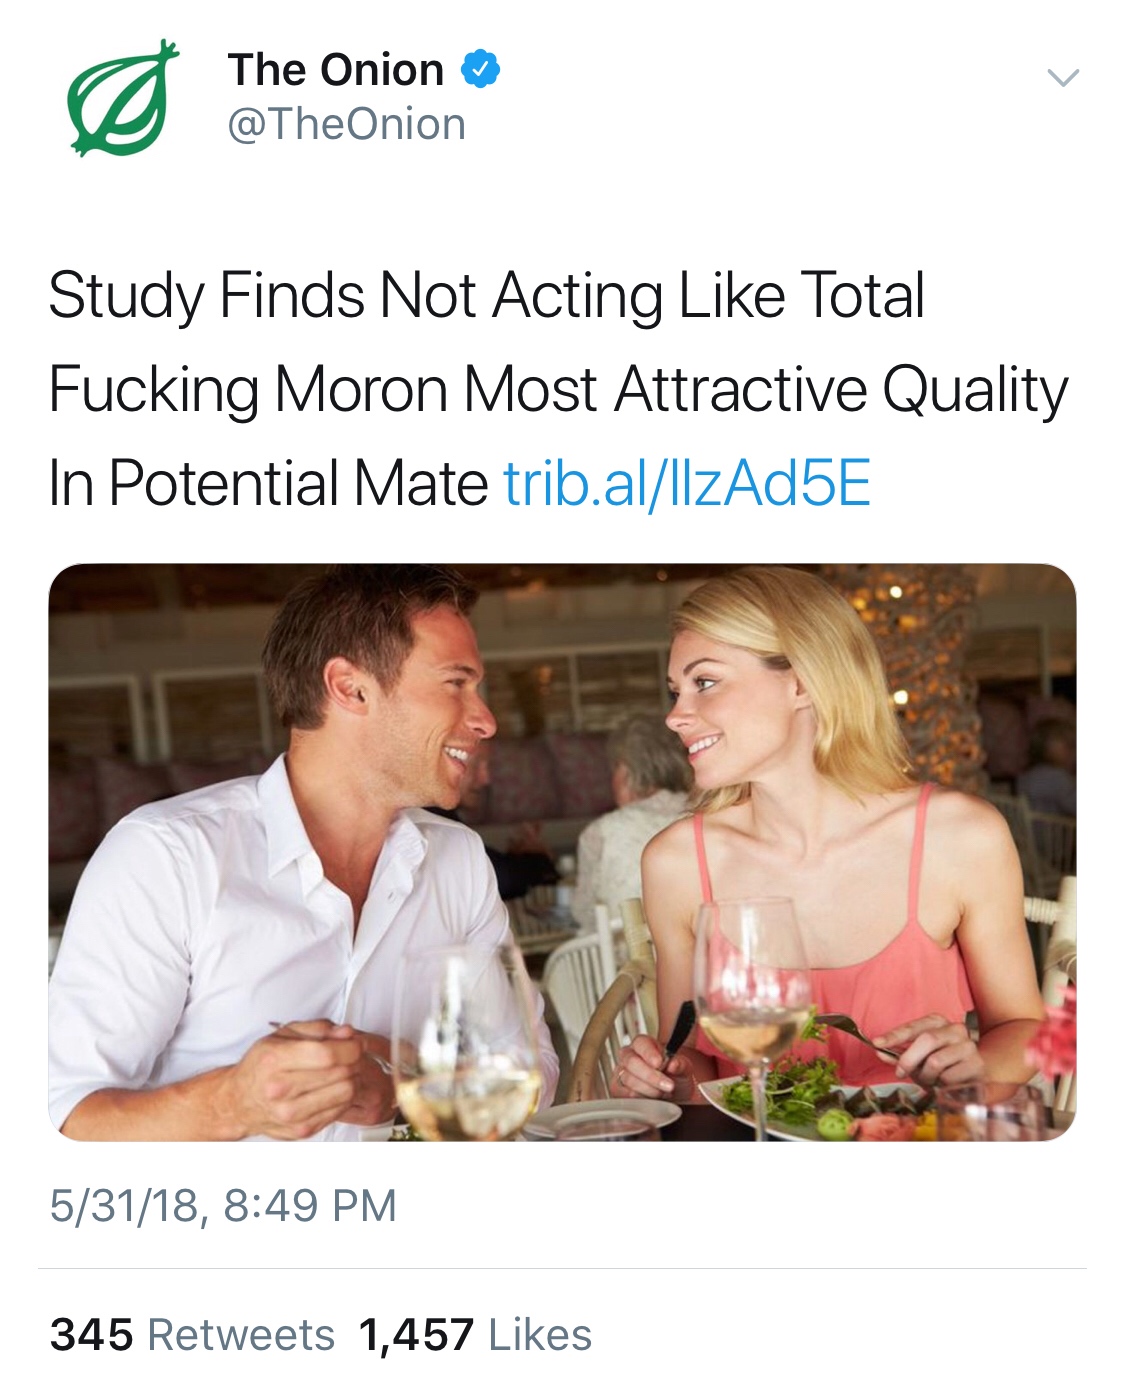 marina joyce as a school counsellor - The Onion Study Finds Not Acting Total Fucking Moron Most Attractive Quality In Potential Mate trib.alIlzAd5E 53118, 345 1,457